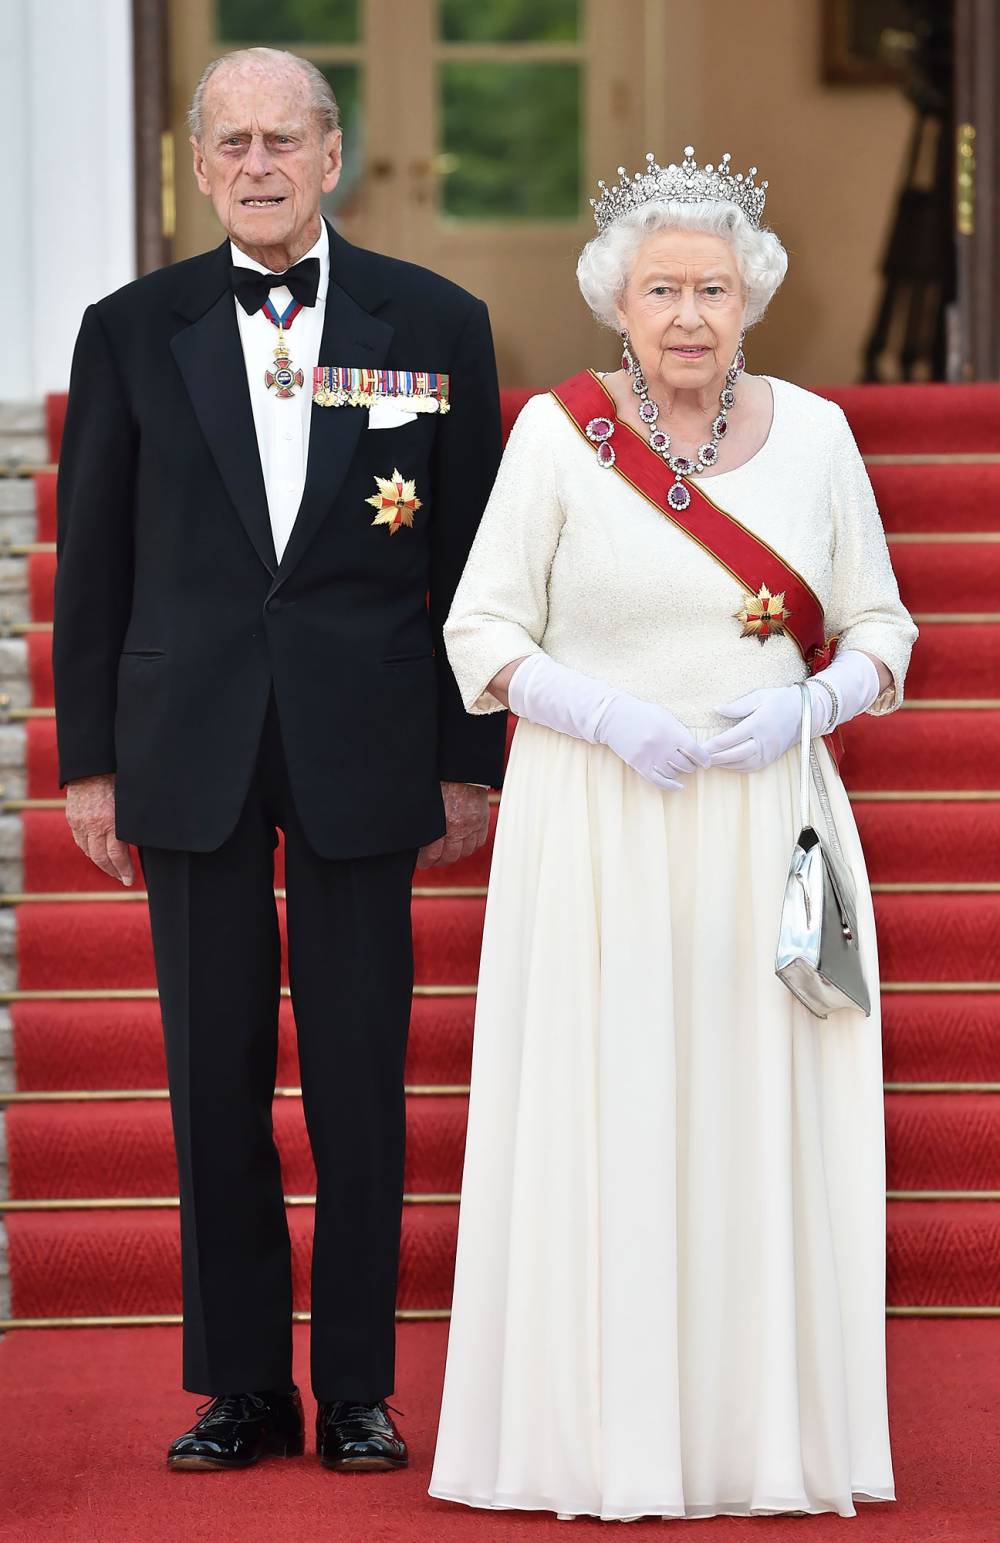 Queen Enters 8-Day Period of Mourning: Royal Protocols After Philip's Death